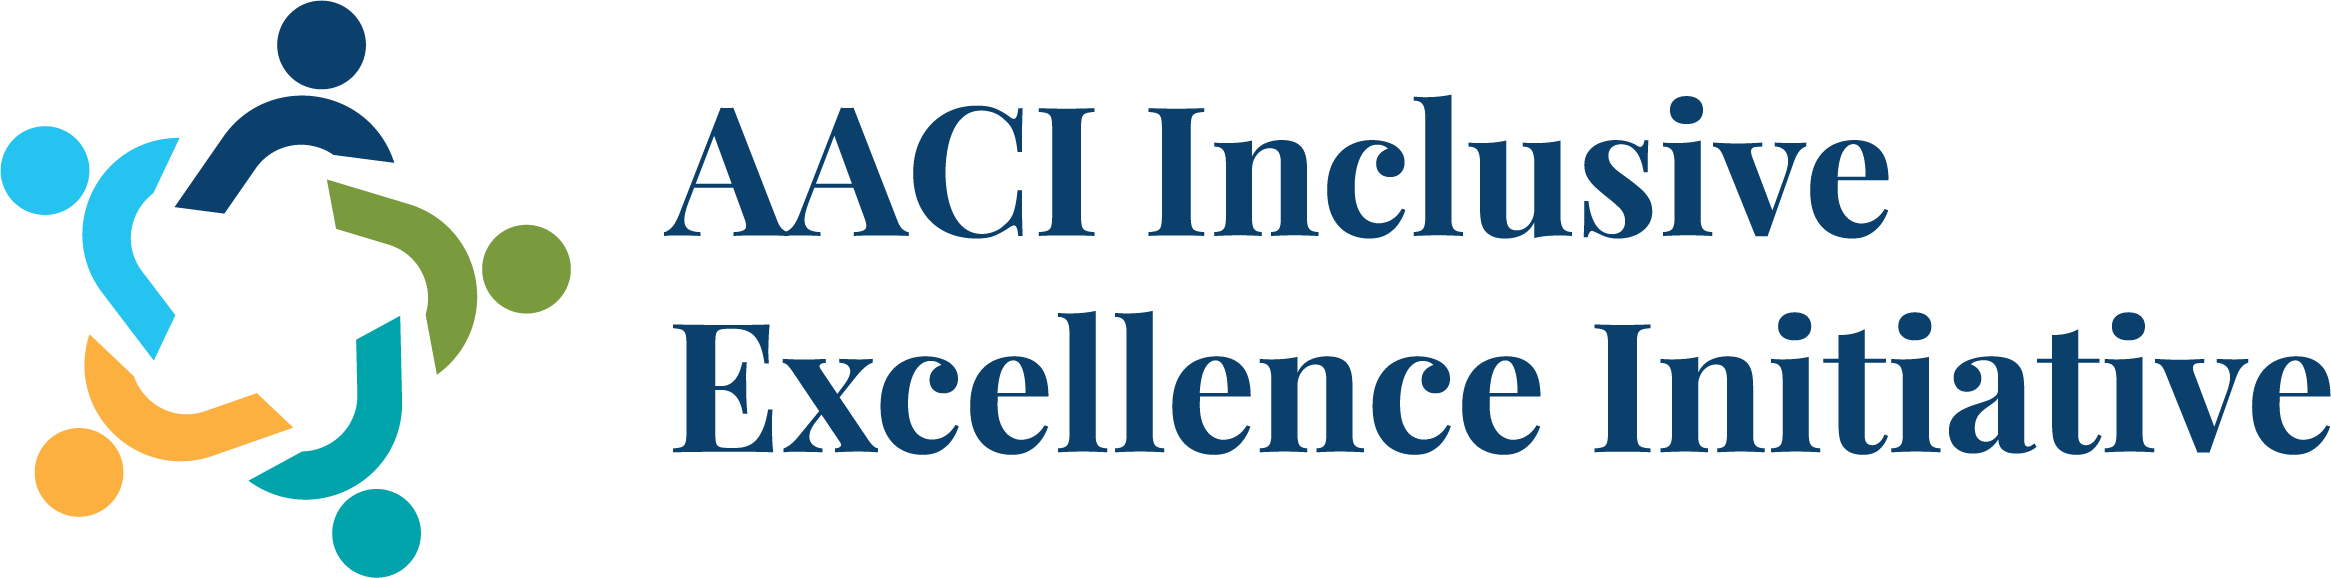 AACI Inclusive Excellence Initiative